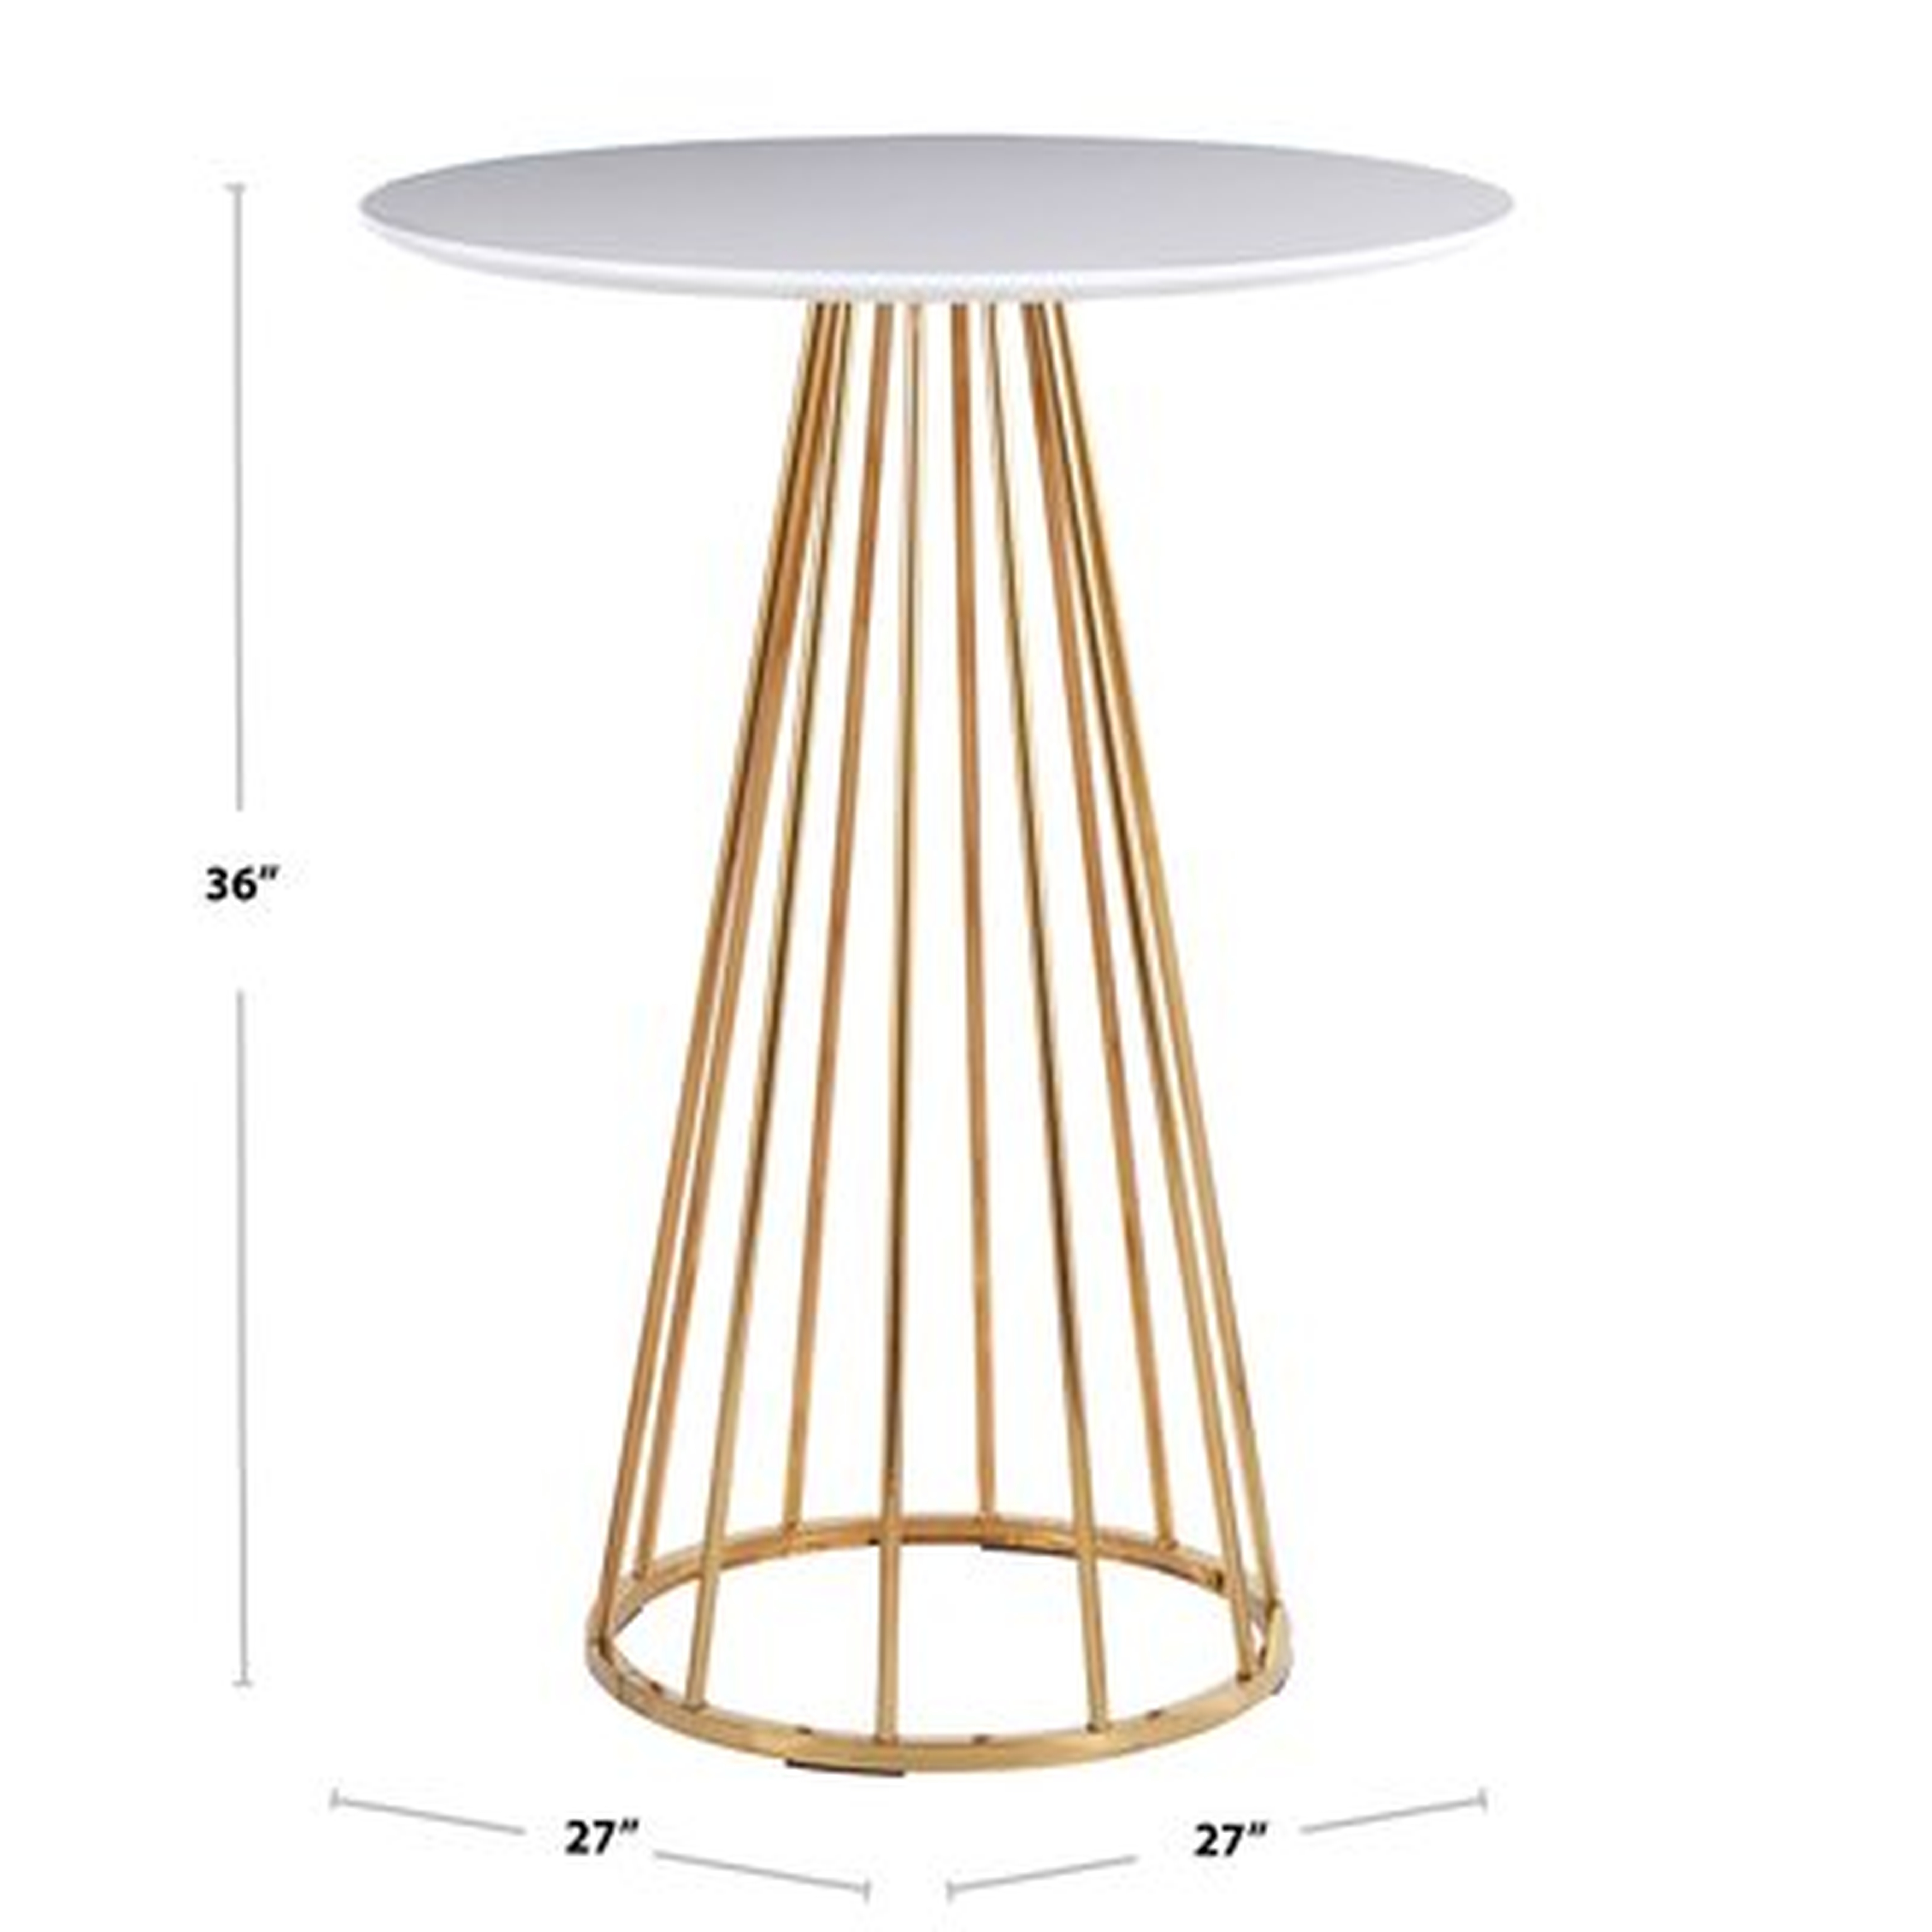 Canary Contemporary/glam Counter Table In Gold Steel And Black Wood By Mercer41 - Wayfair